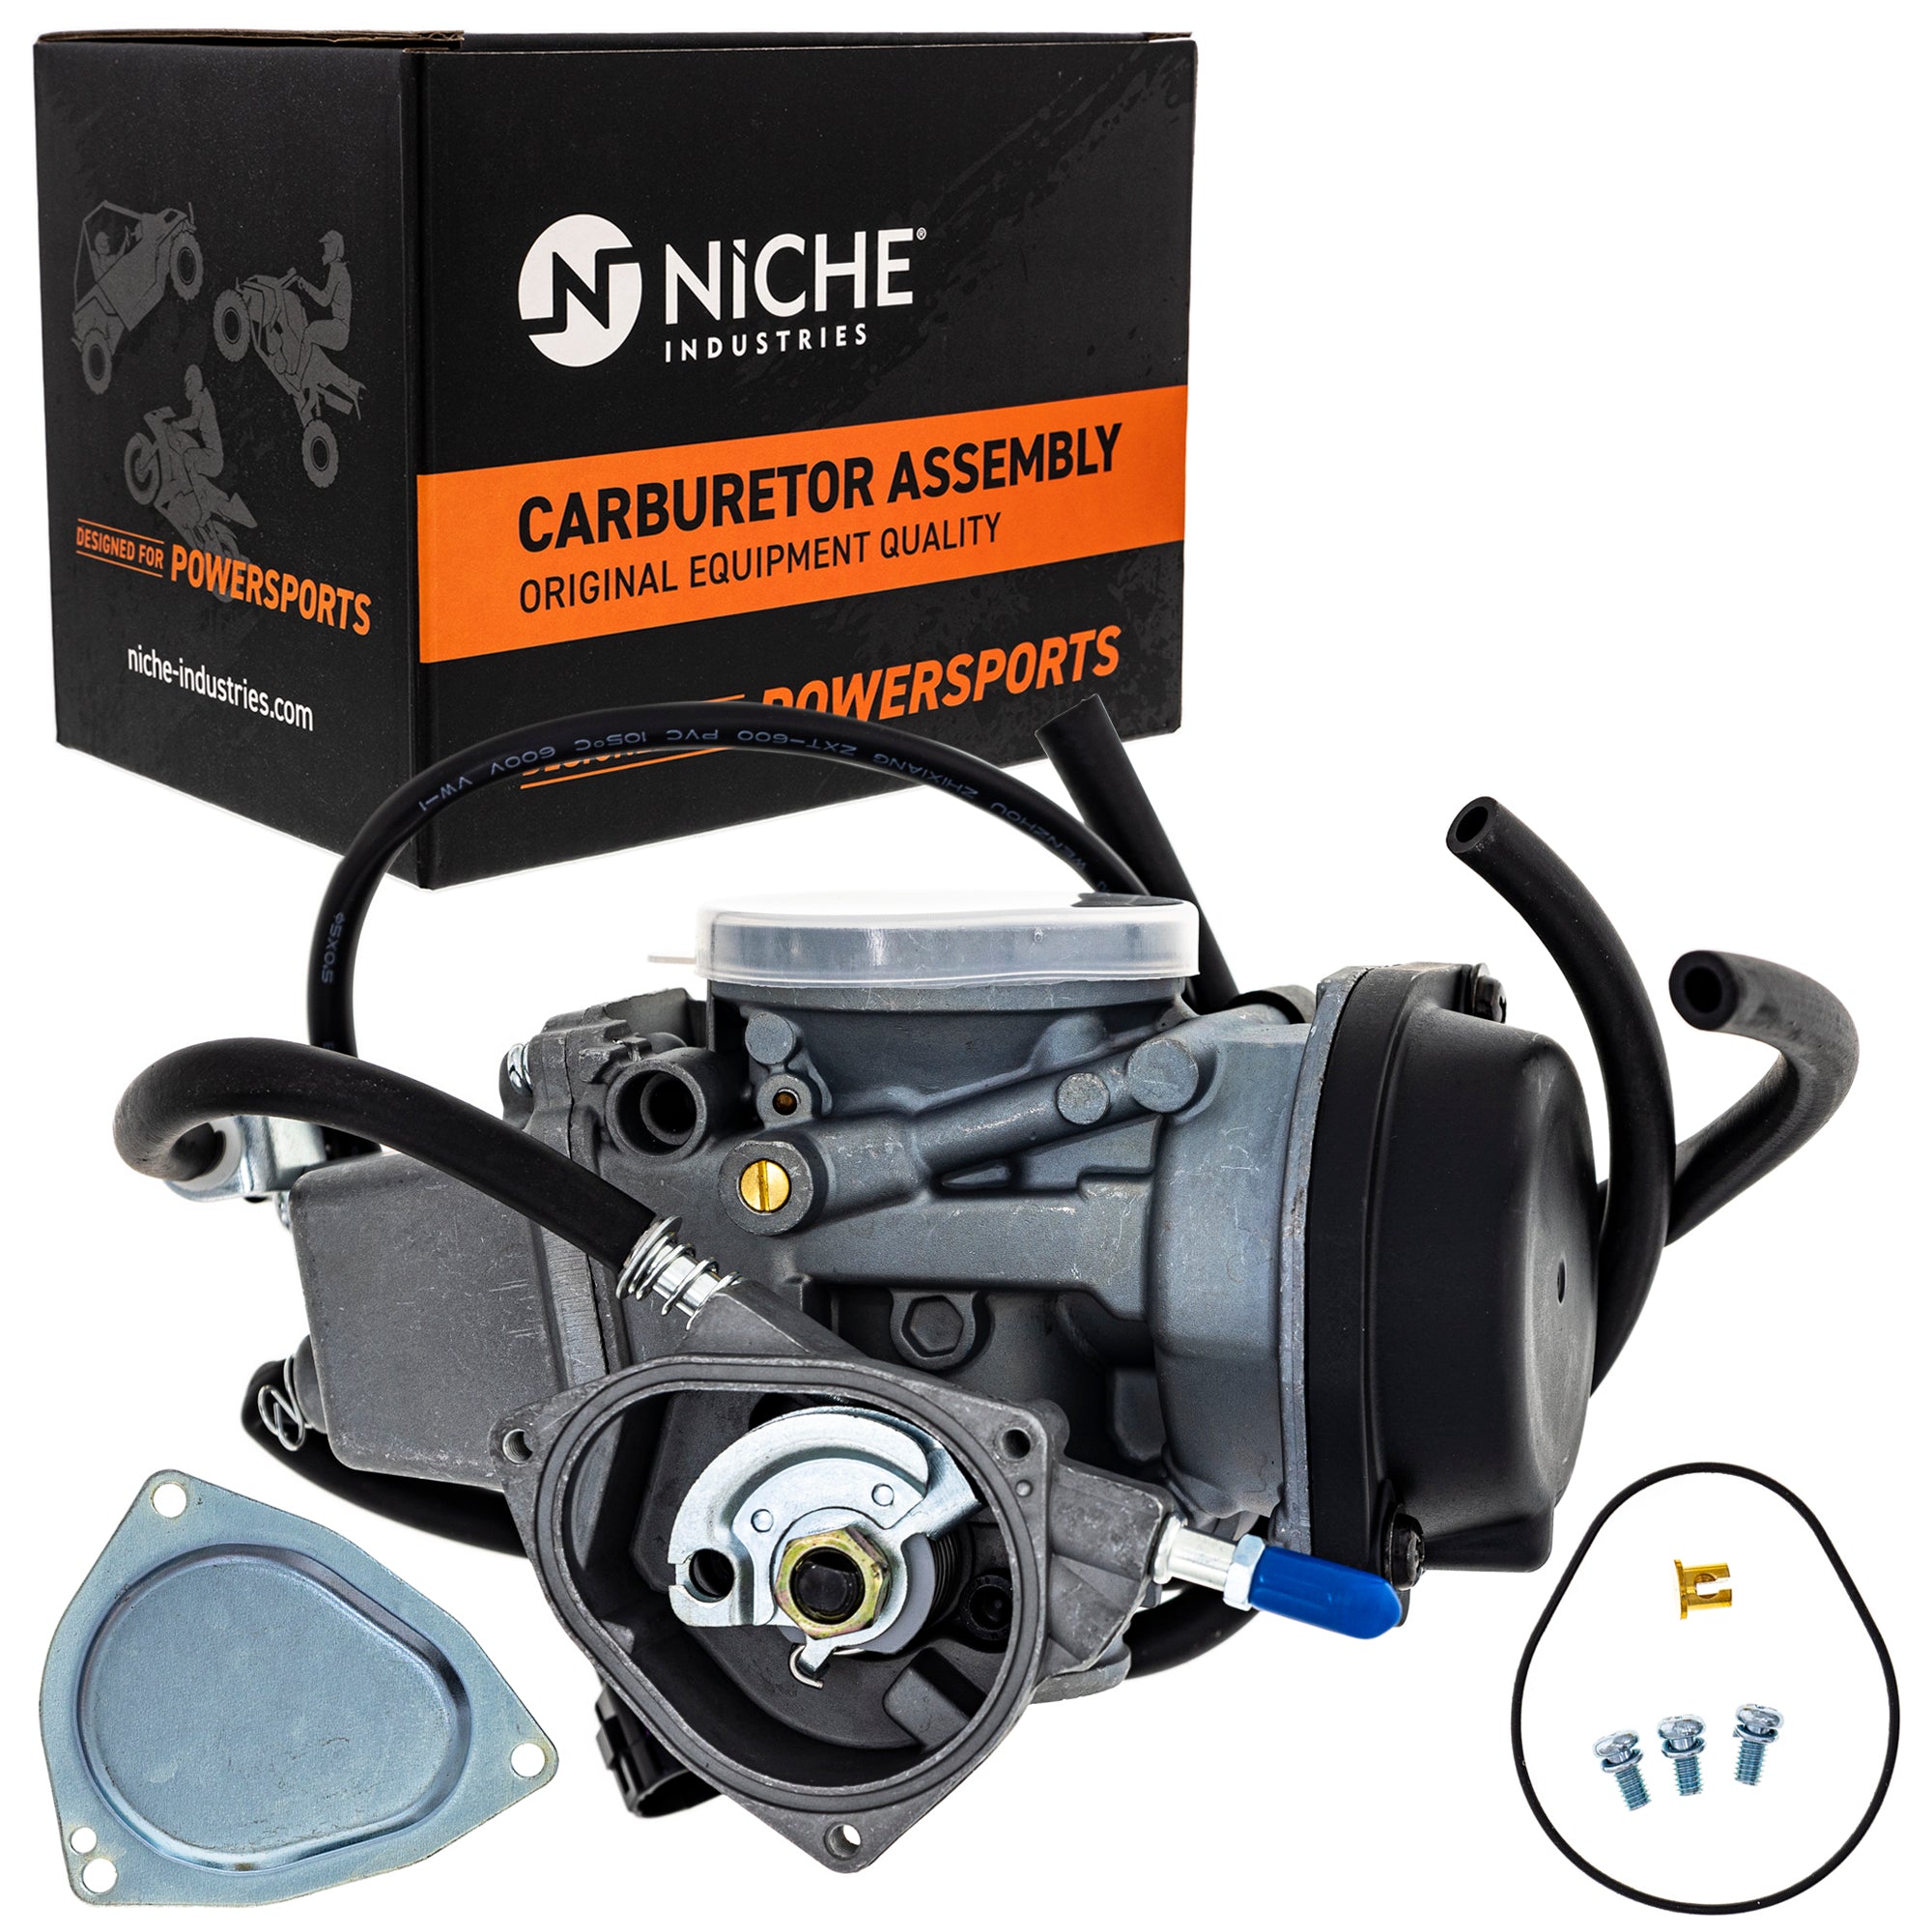 NICHE 519-KCR2205B Carburetor Assembly for zOTHER